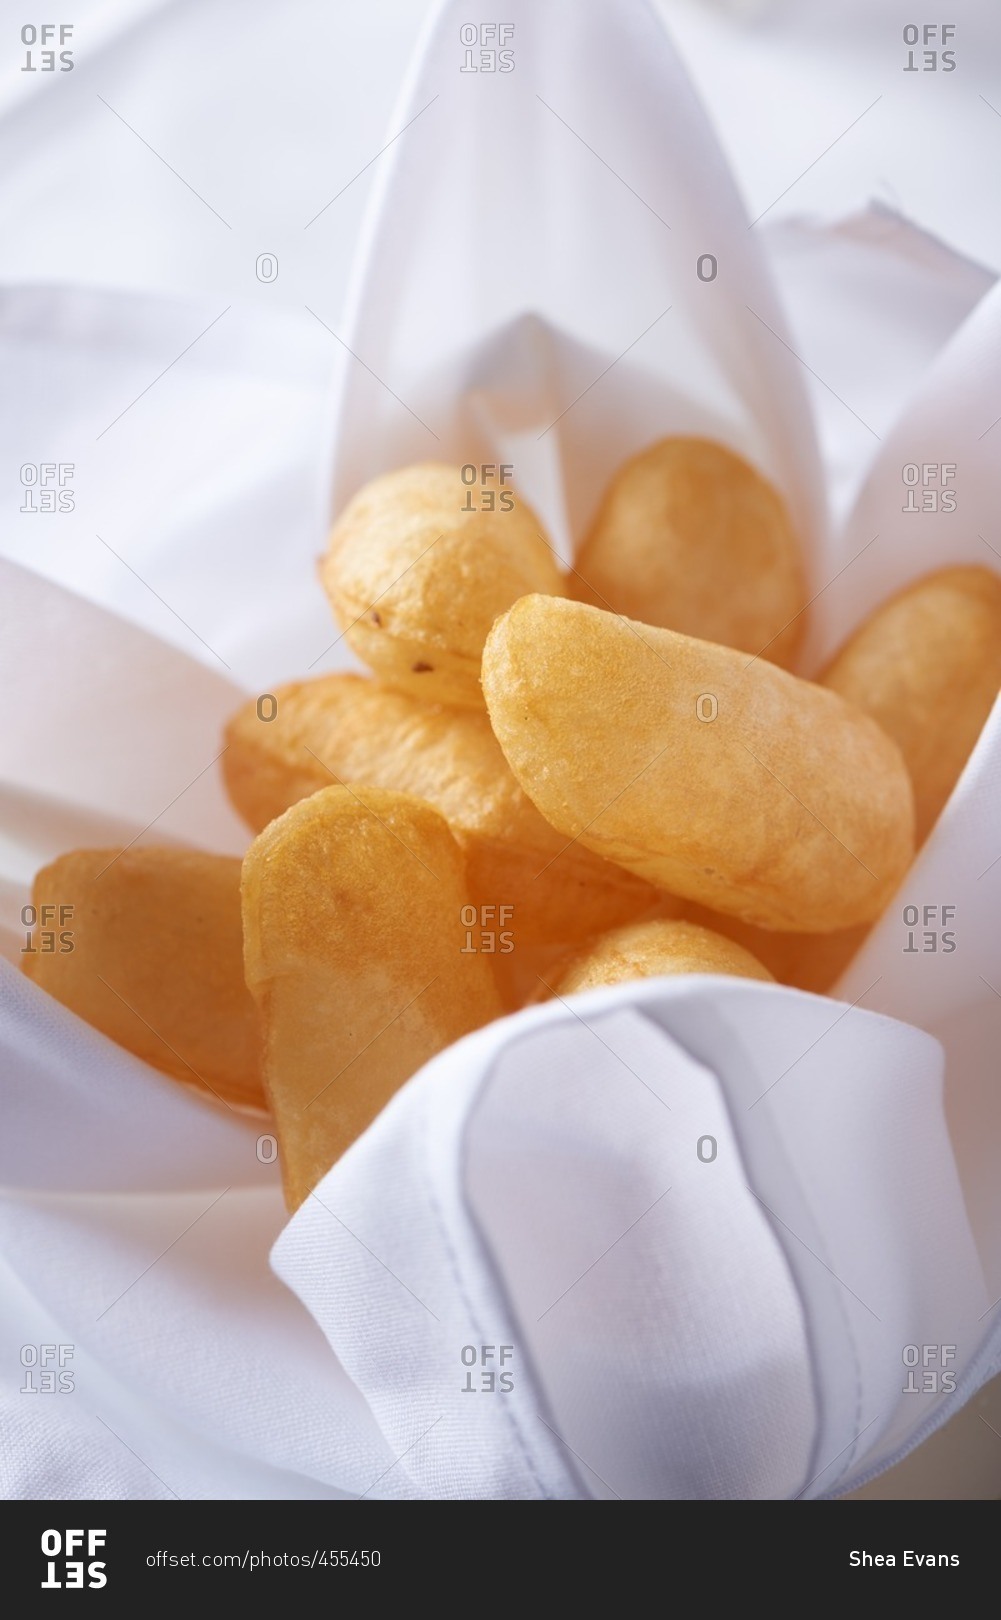 Traditional French fries, Pommes De Terre Souffles, potatoes that have been puffed, hollow on the inside and served hot with sea salt.